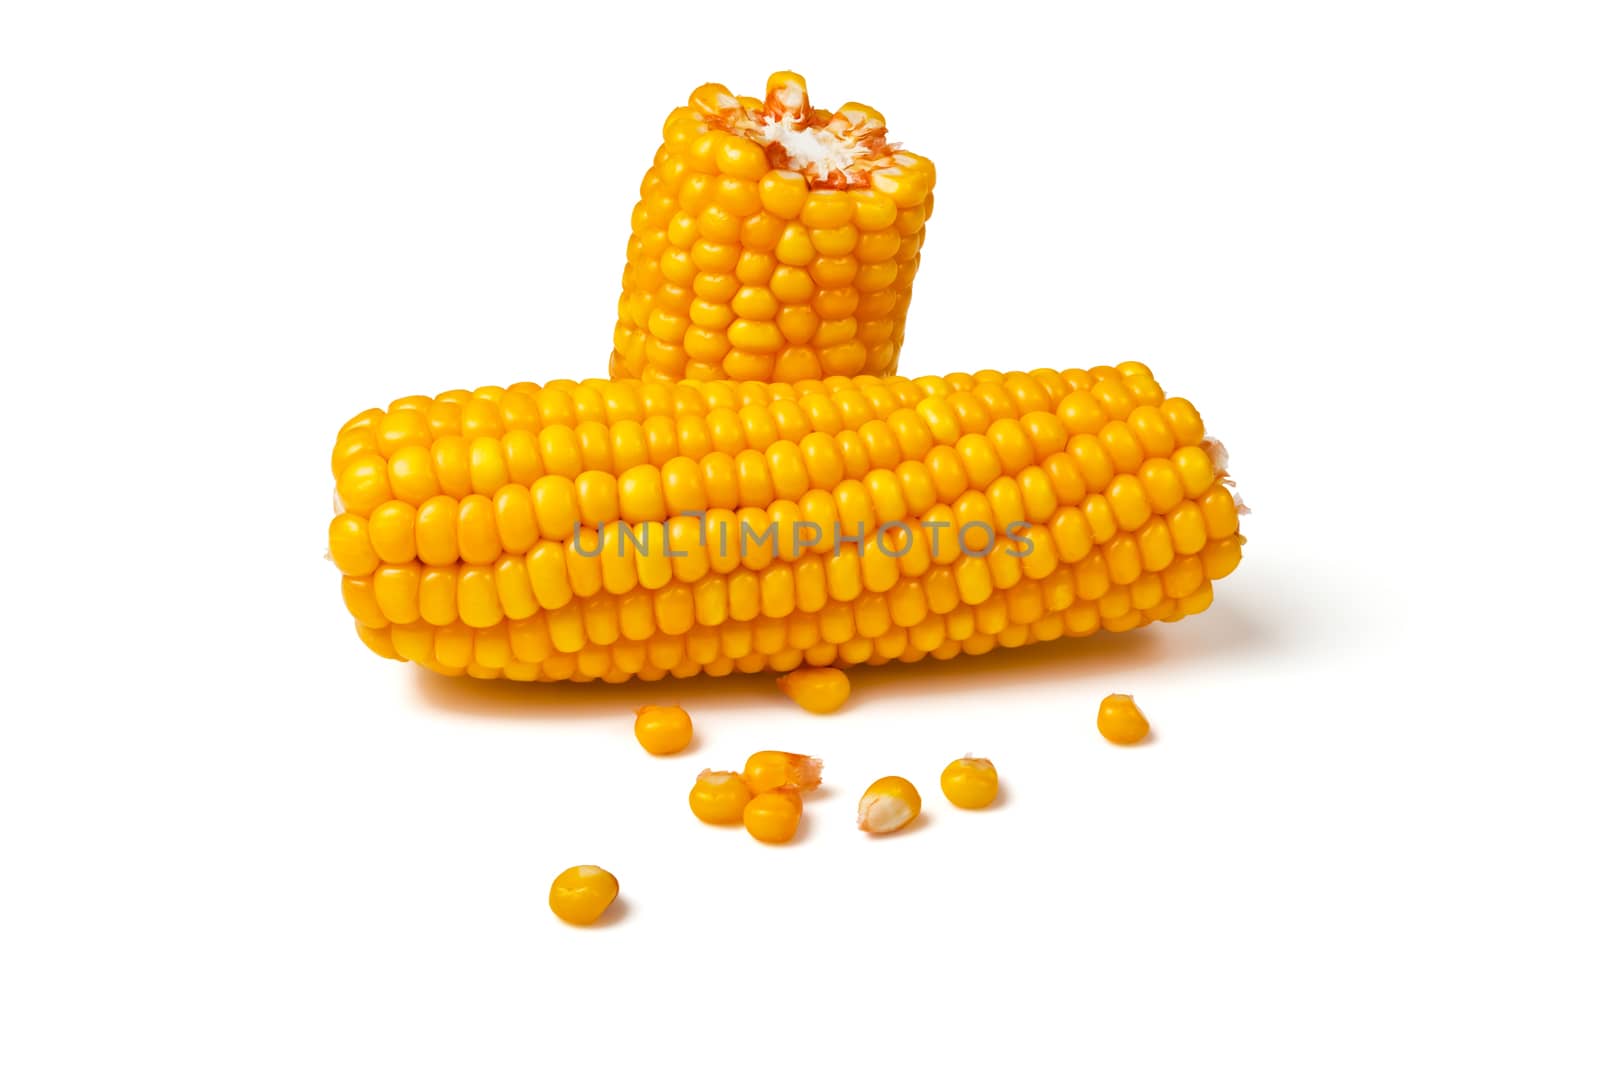 Corn on the cob and a handful of grains on white background